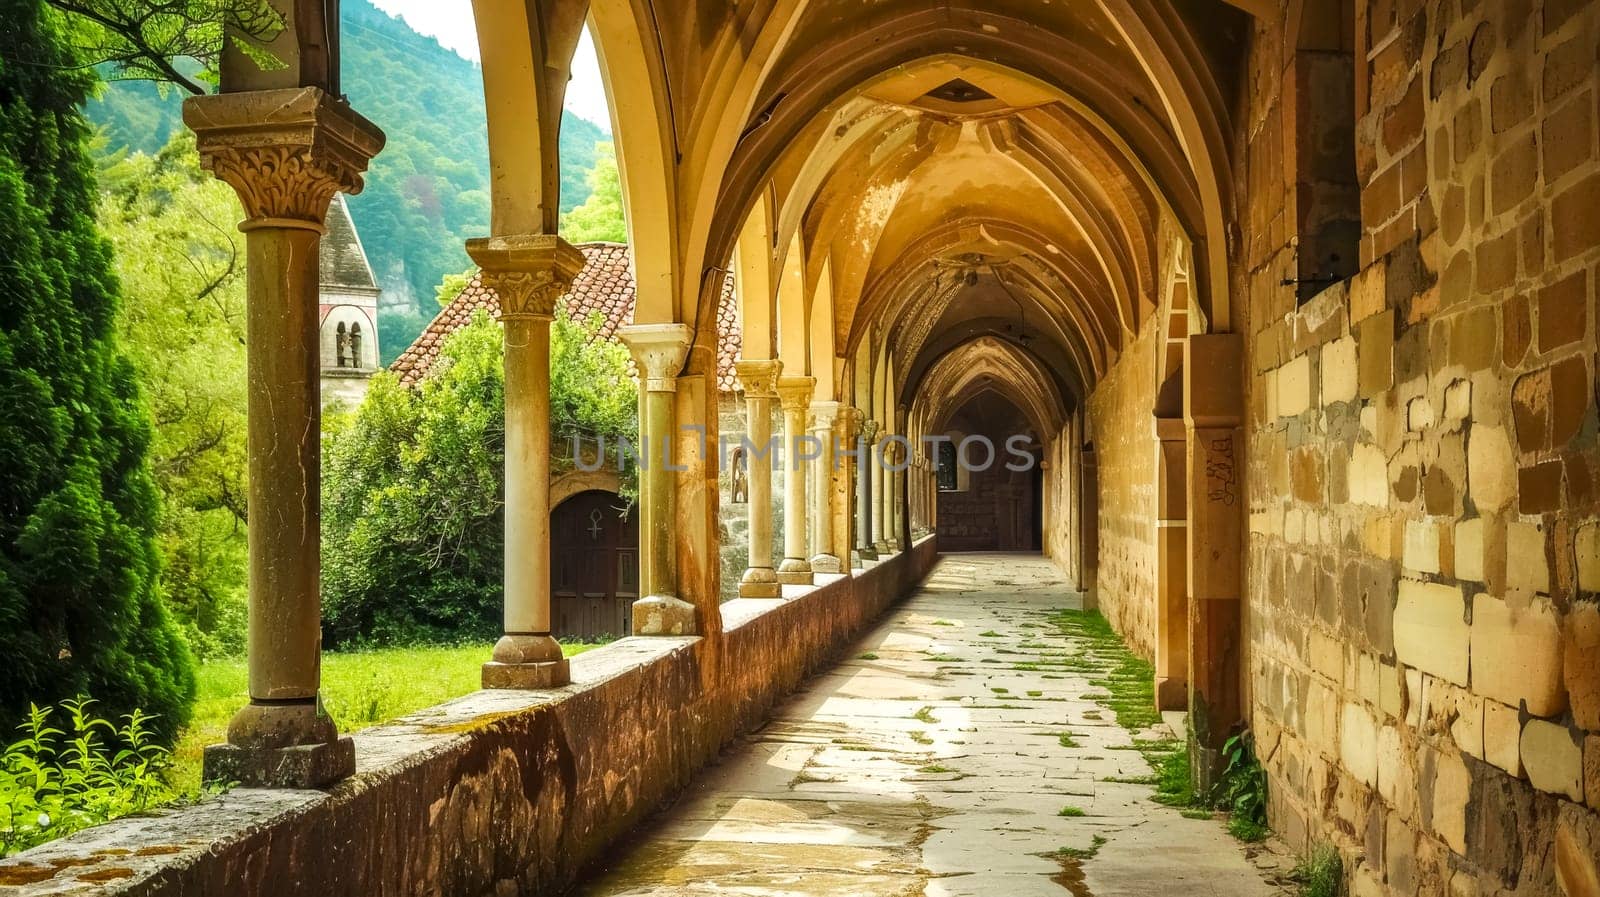 Serene monastery cloister in lush valley by Edophoto